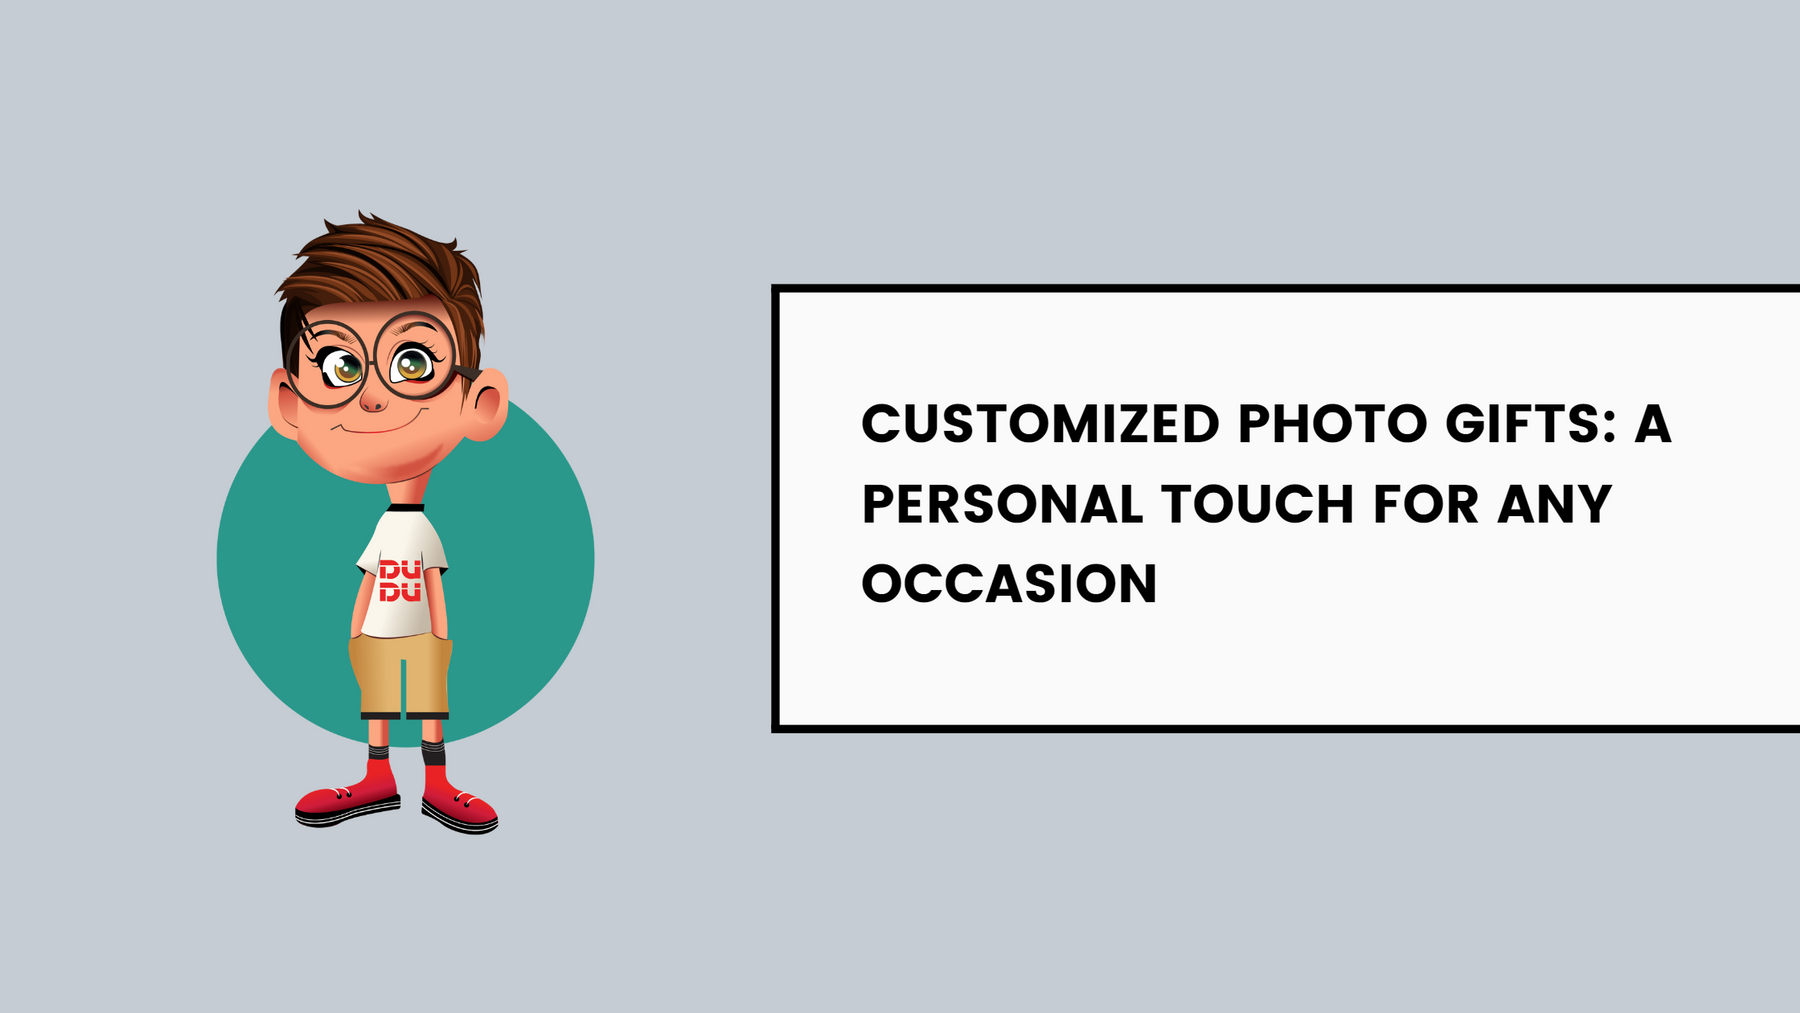 Customized Photo Gifts: A Personal Touch for Any Occasion